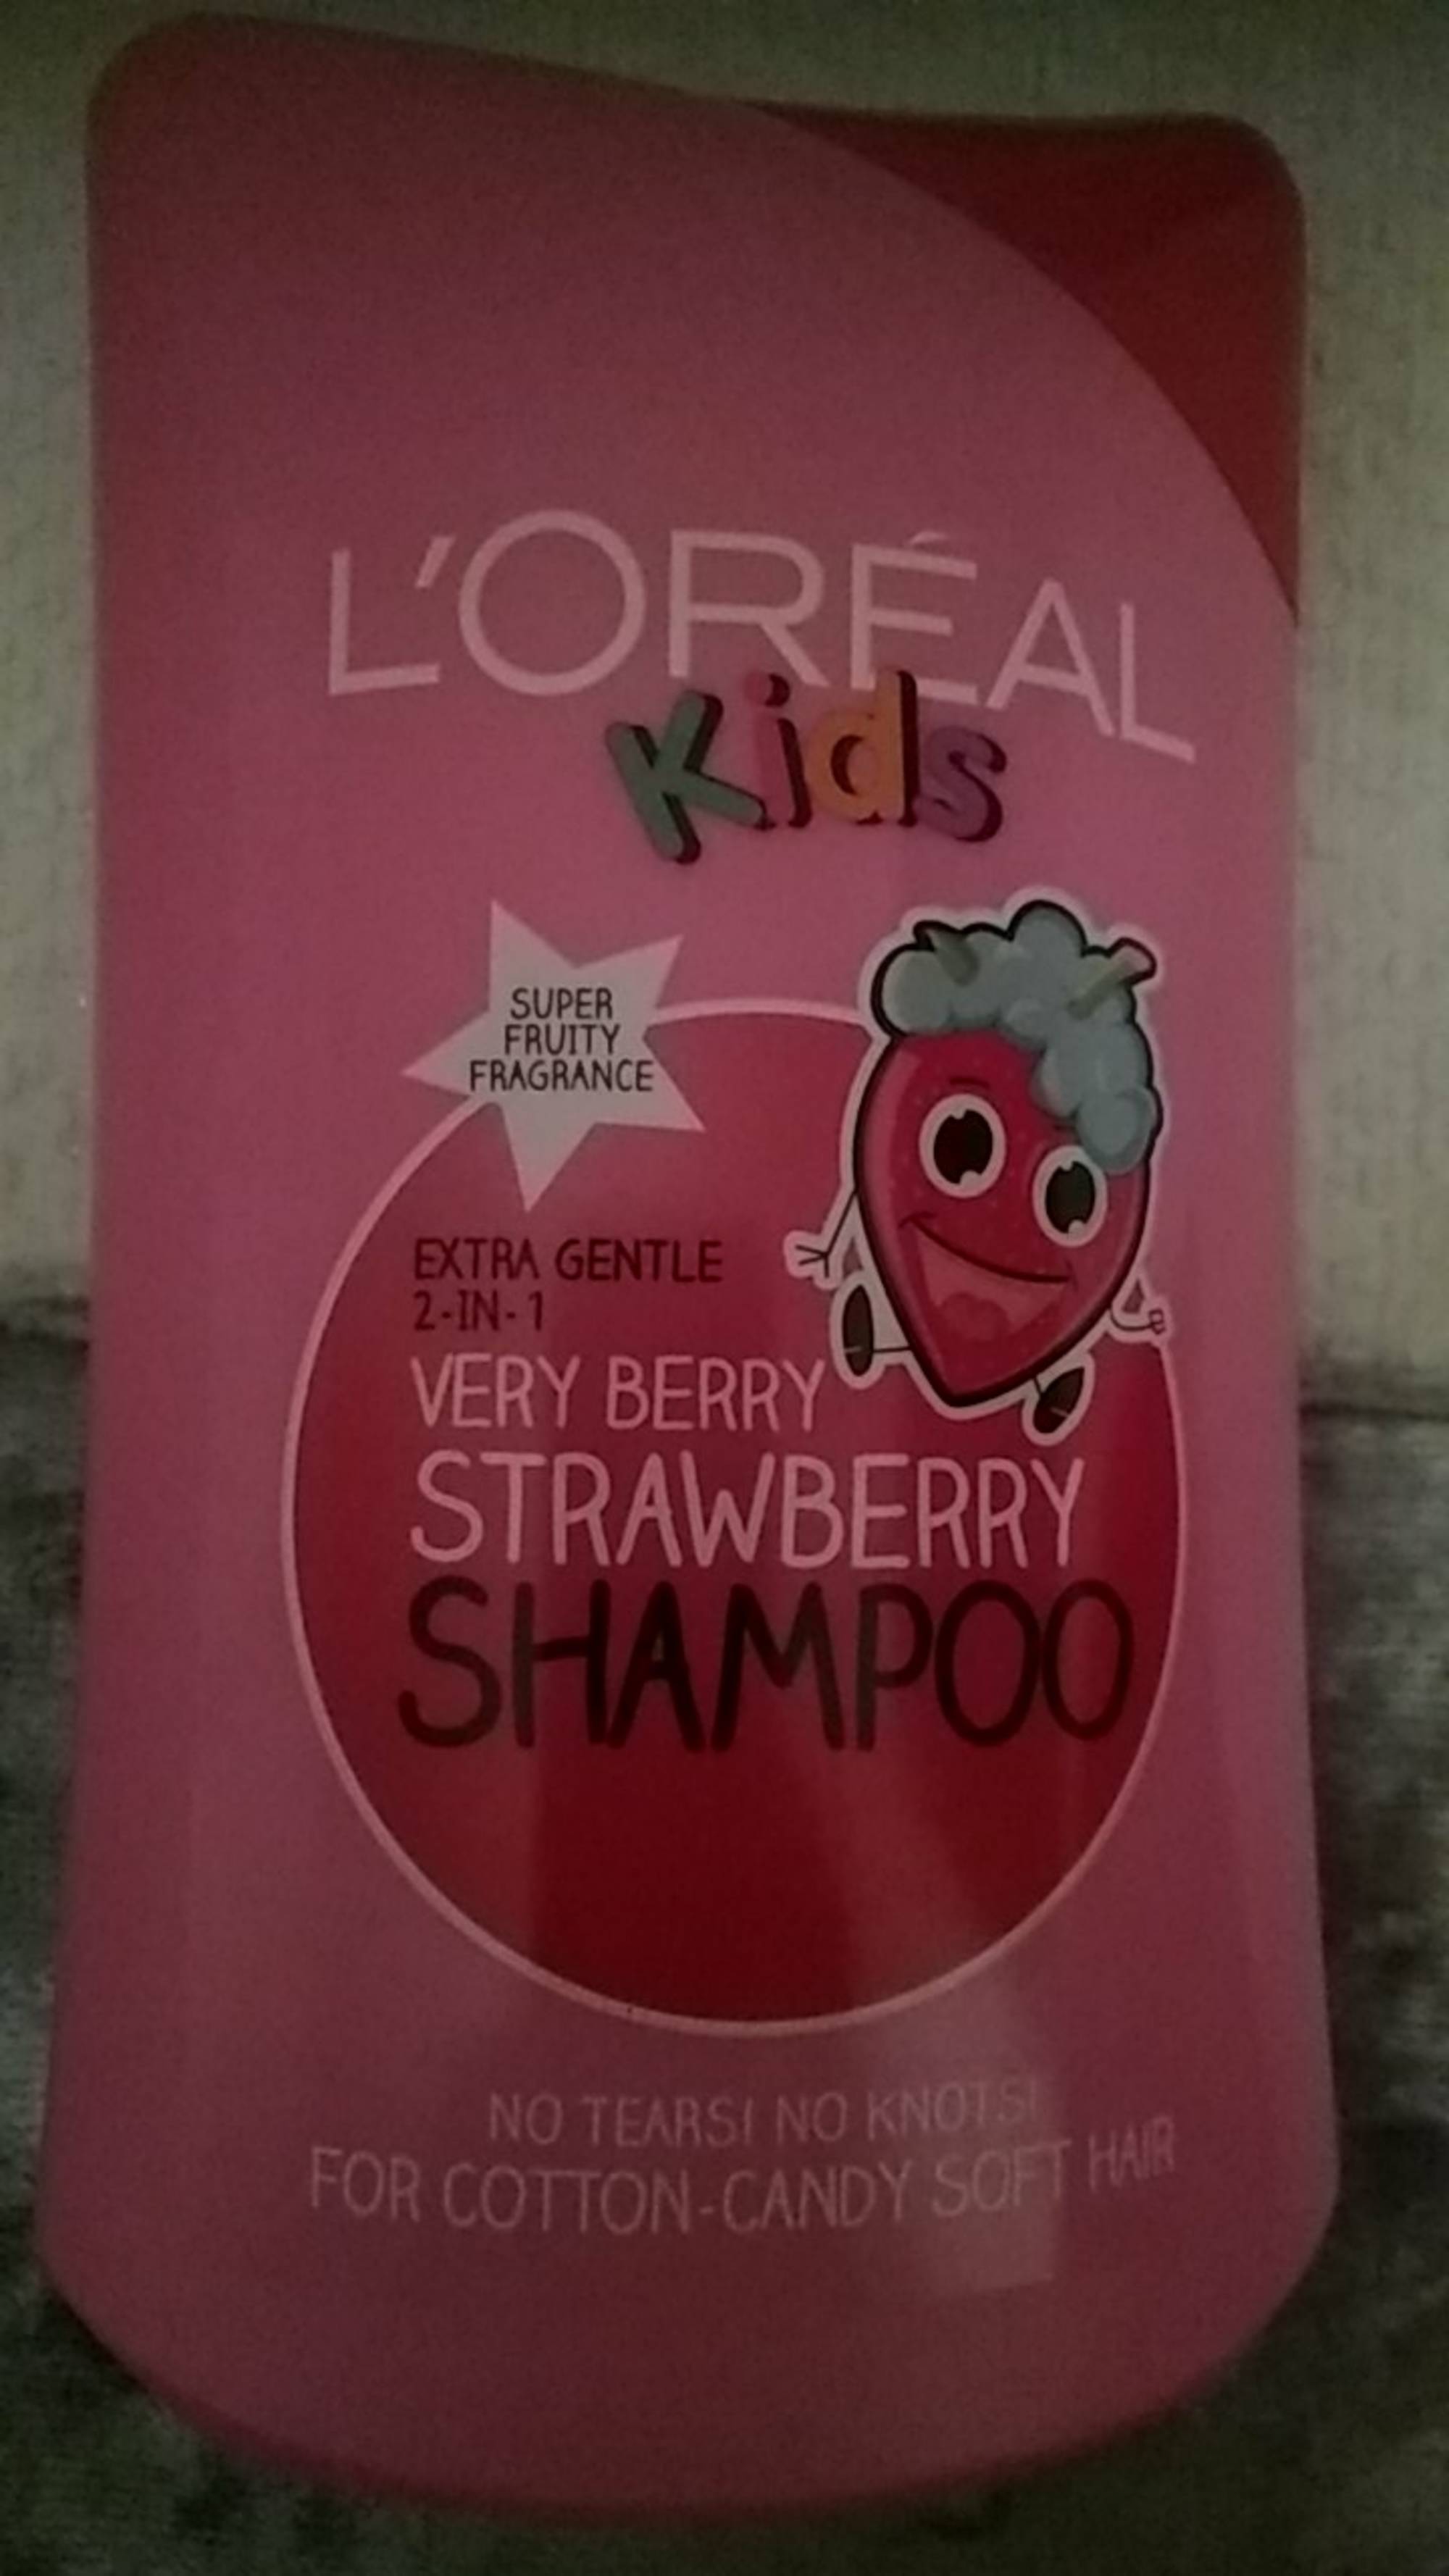 L'ORÉAL - Kids Extra gentle 2-in-1 - Very berry stramberry shampoo